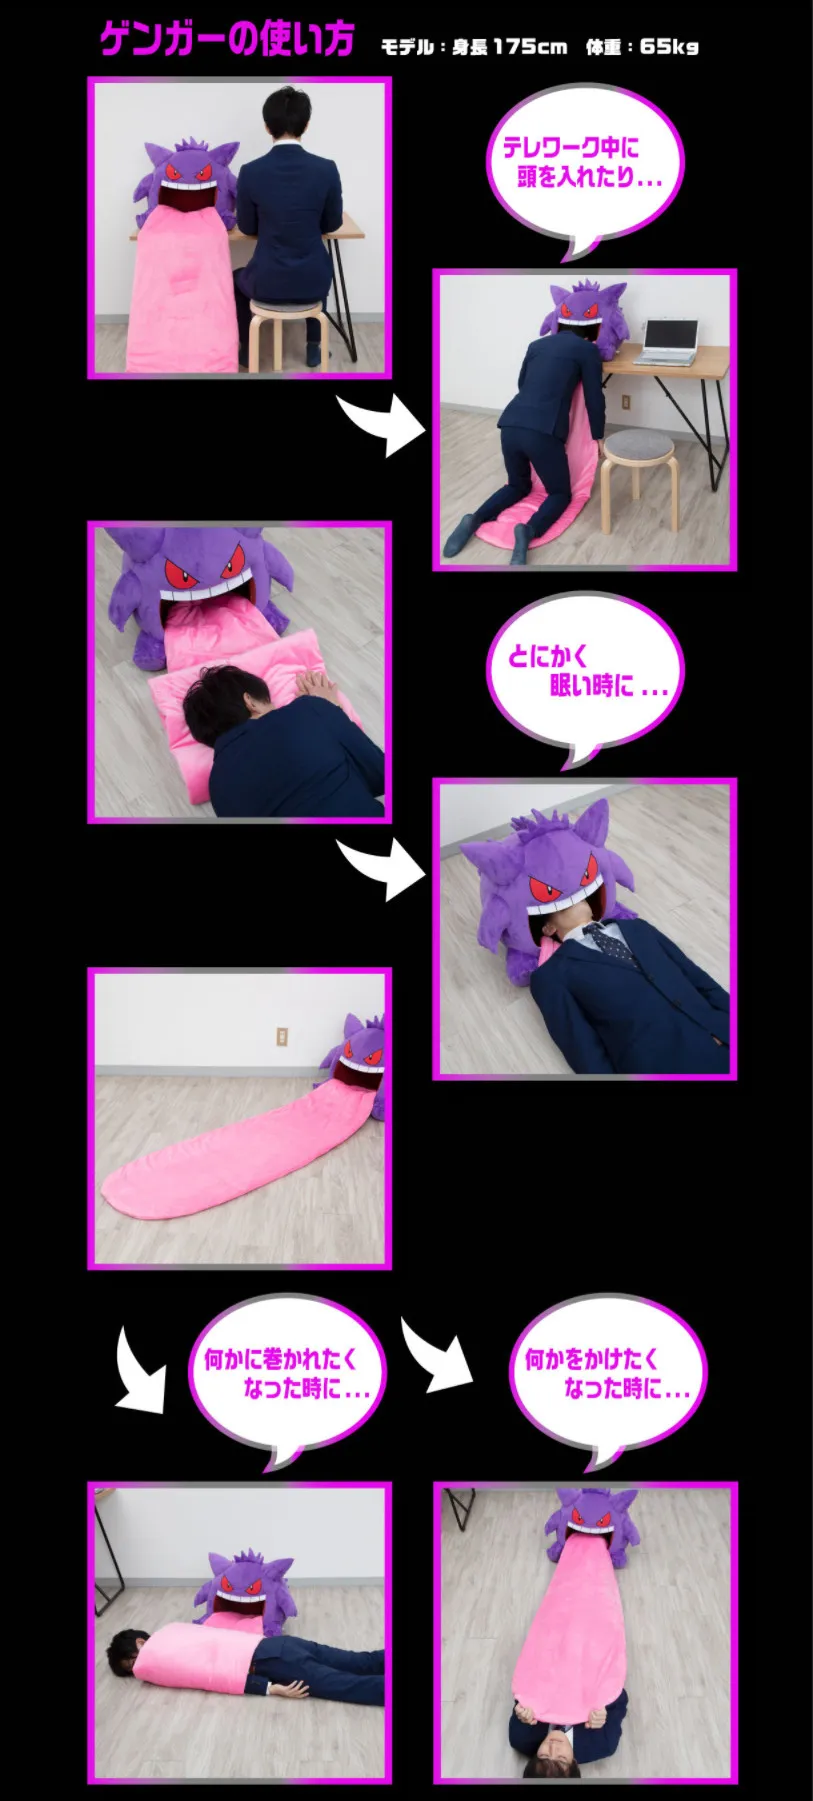 How to Use Gengar Pillow